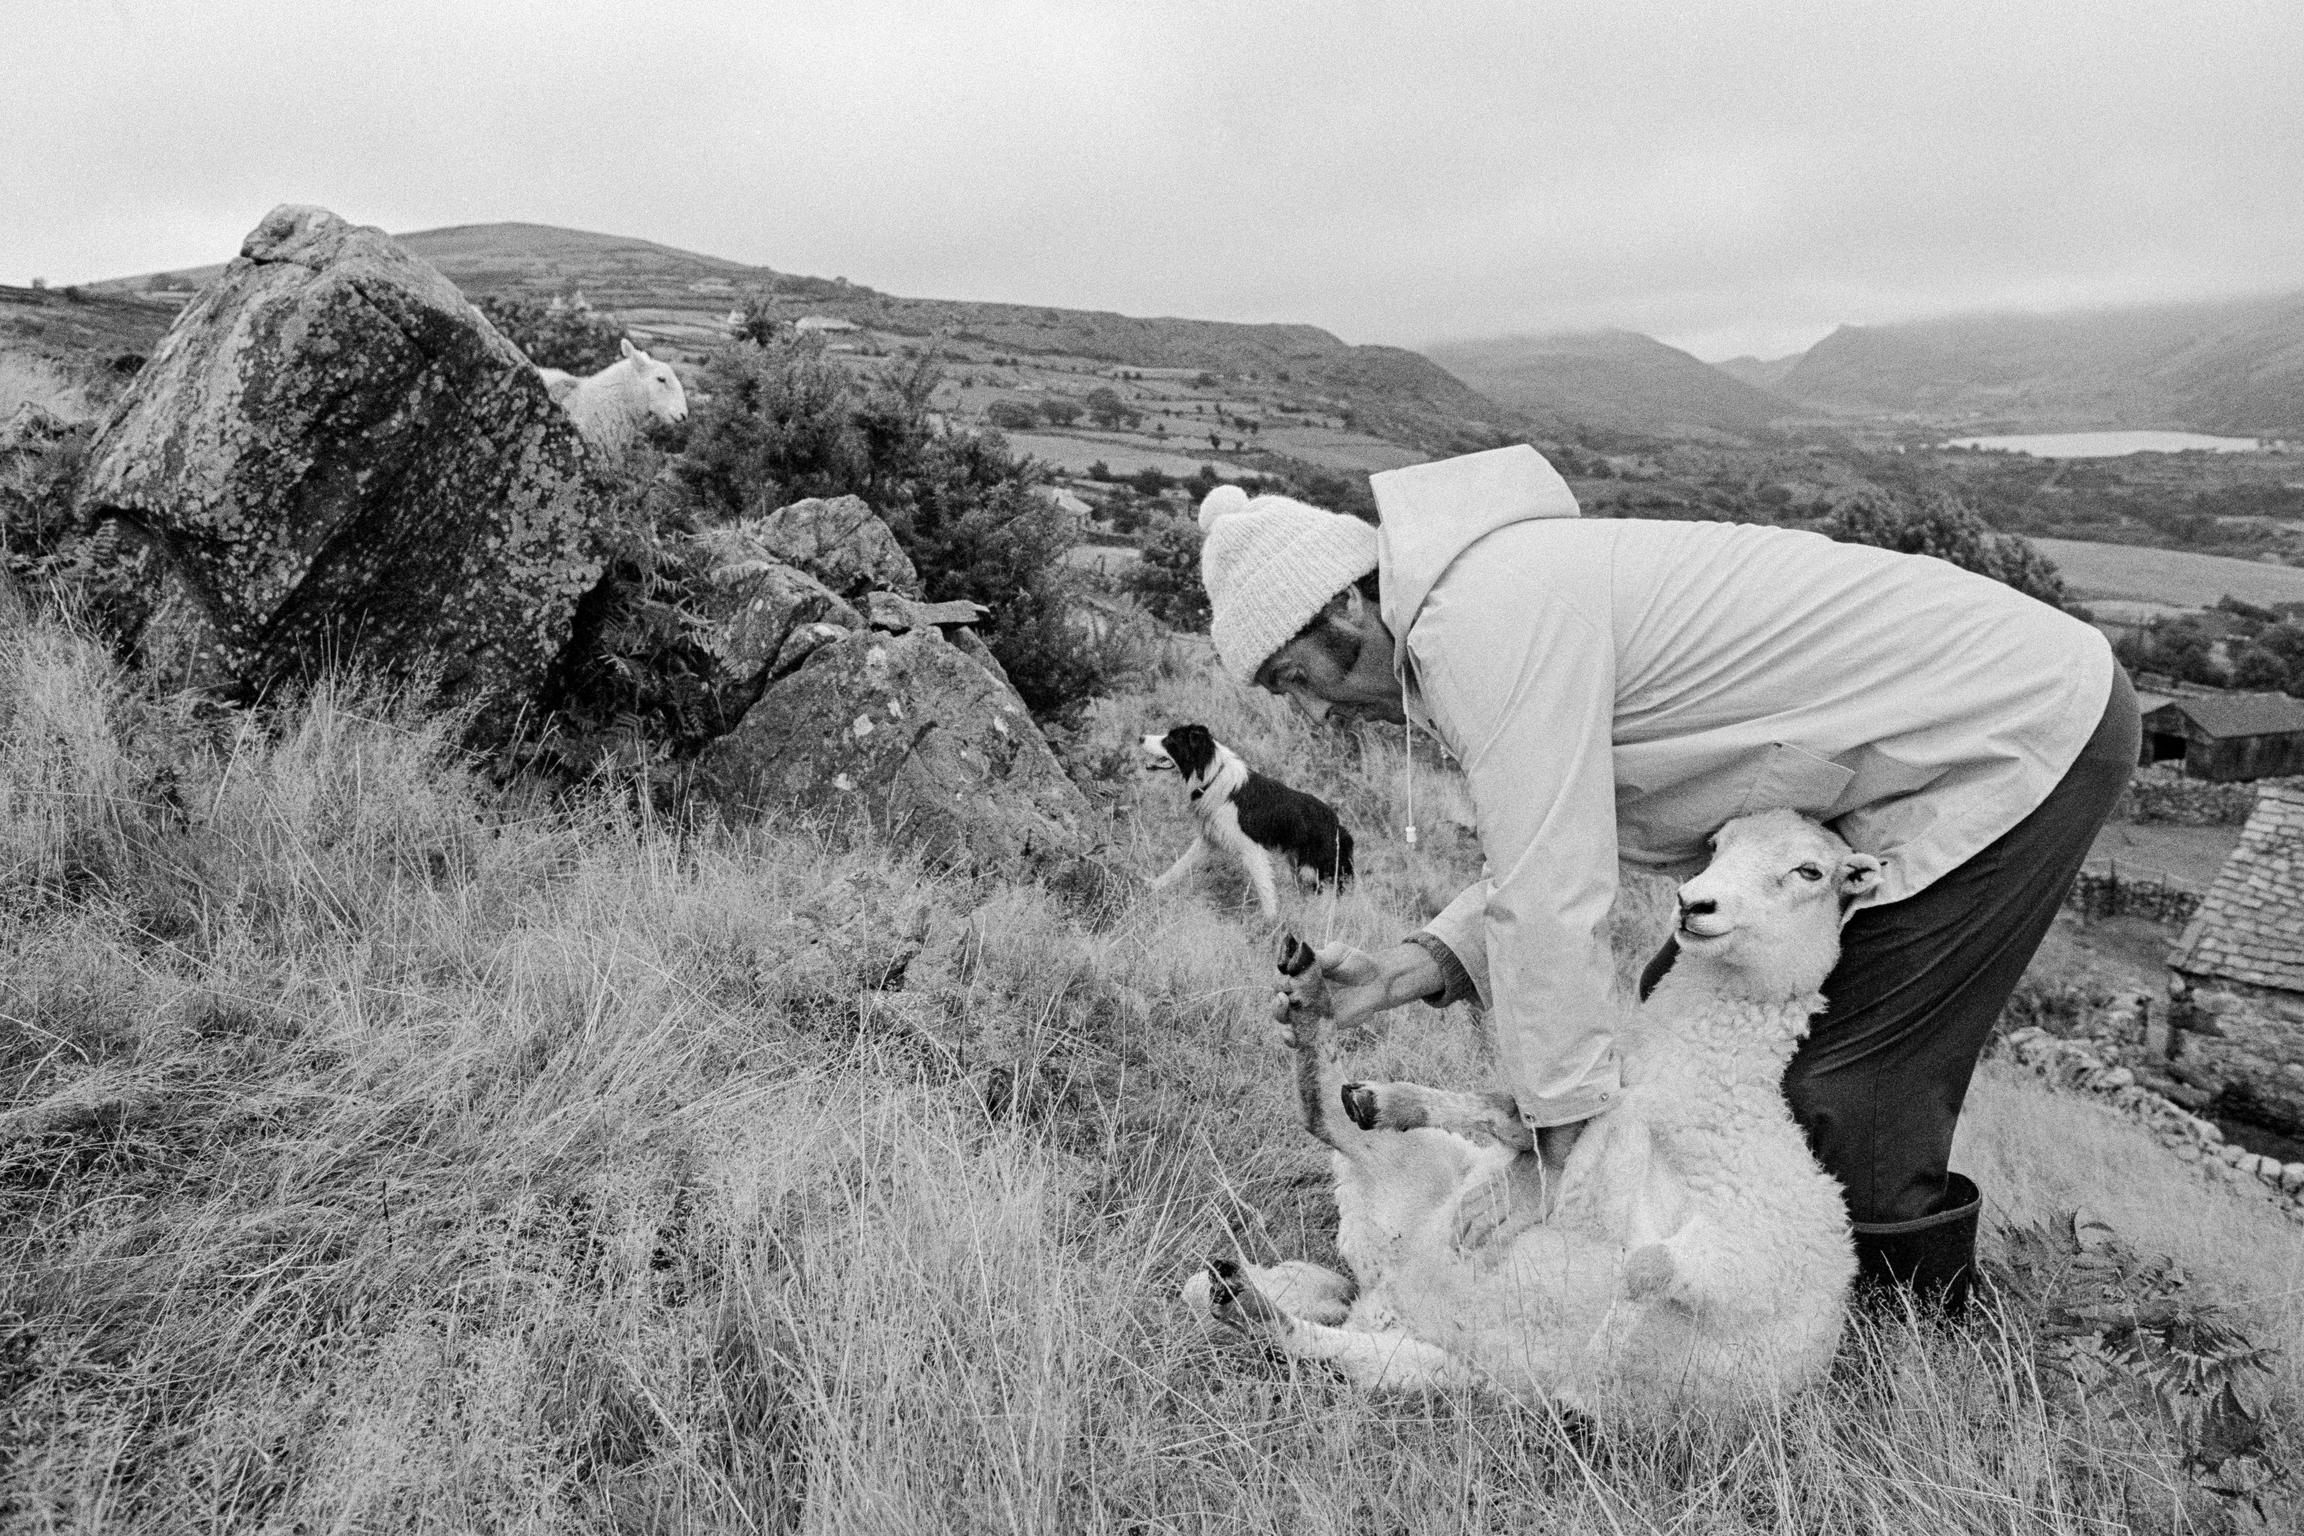 John Ryan Griffiths examining one of his sheep on one of his small holdings. Nant Gwynant, Wales